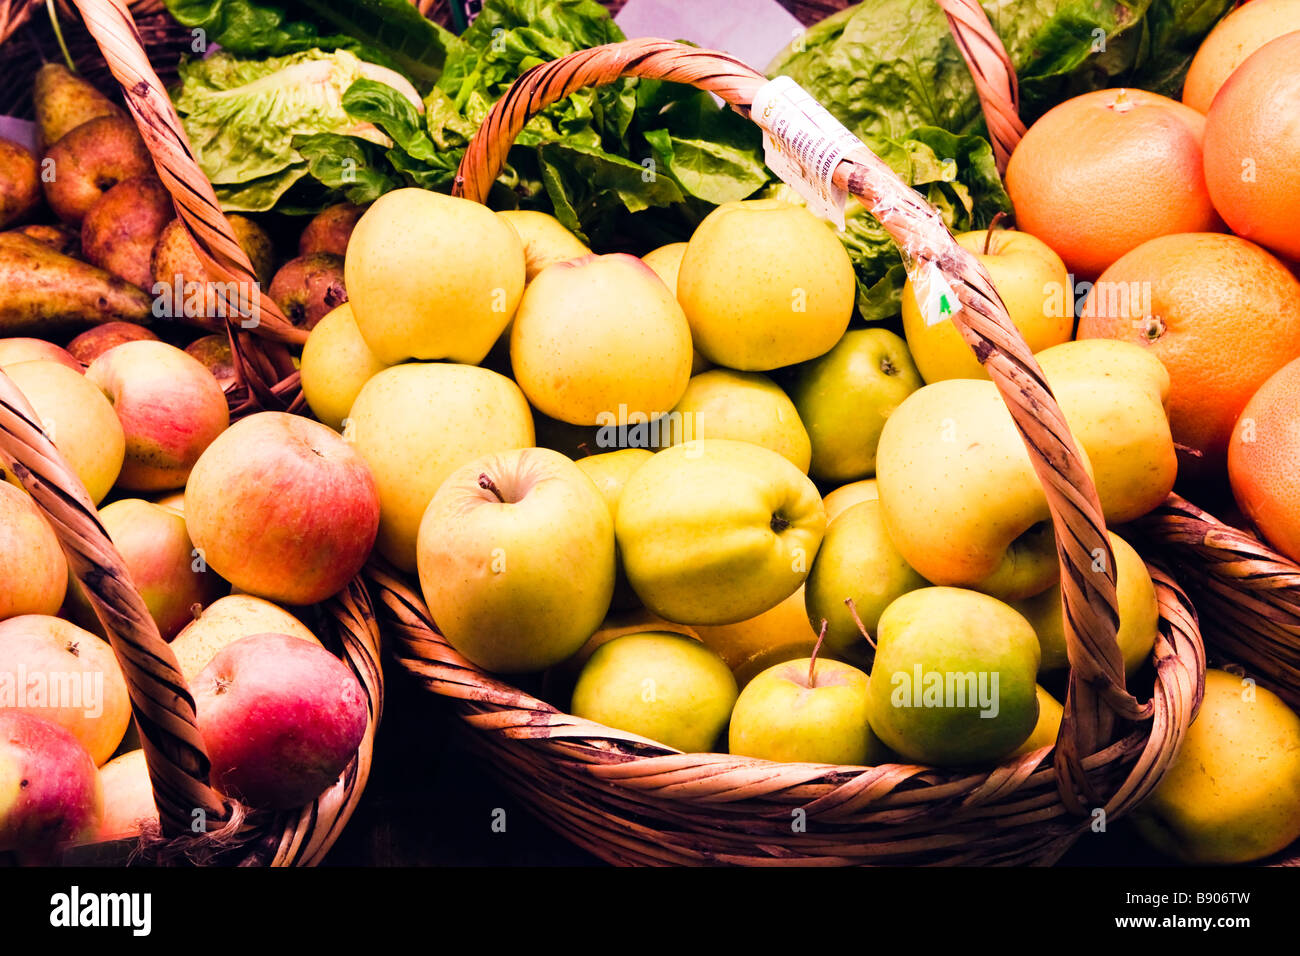 Baskets of ecologically grown fruit for sale in health shop Stock Photo